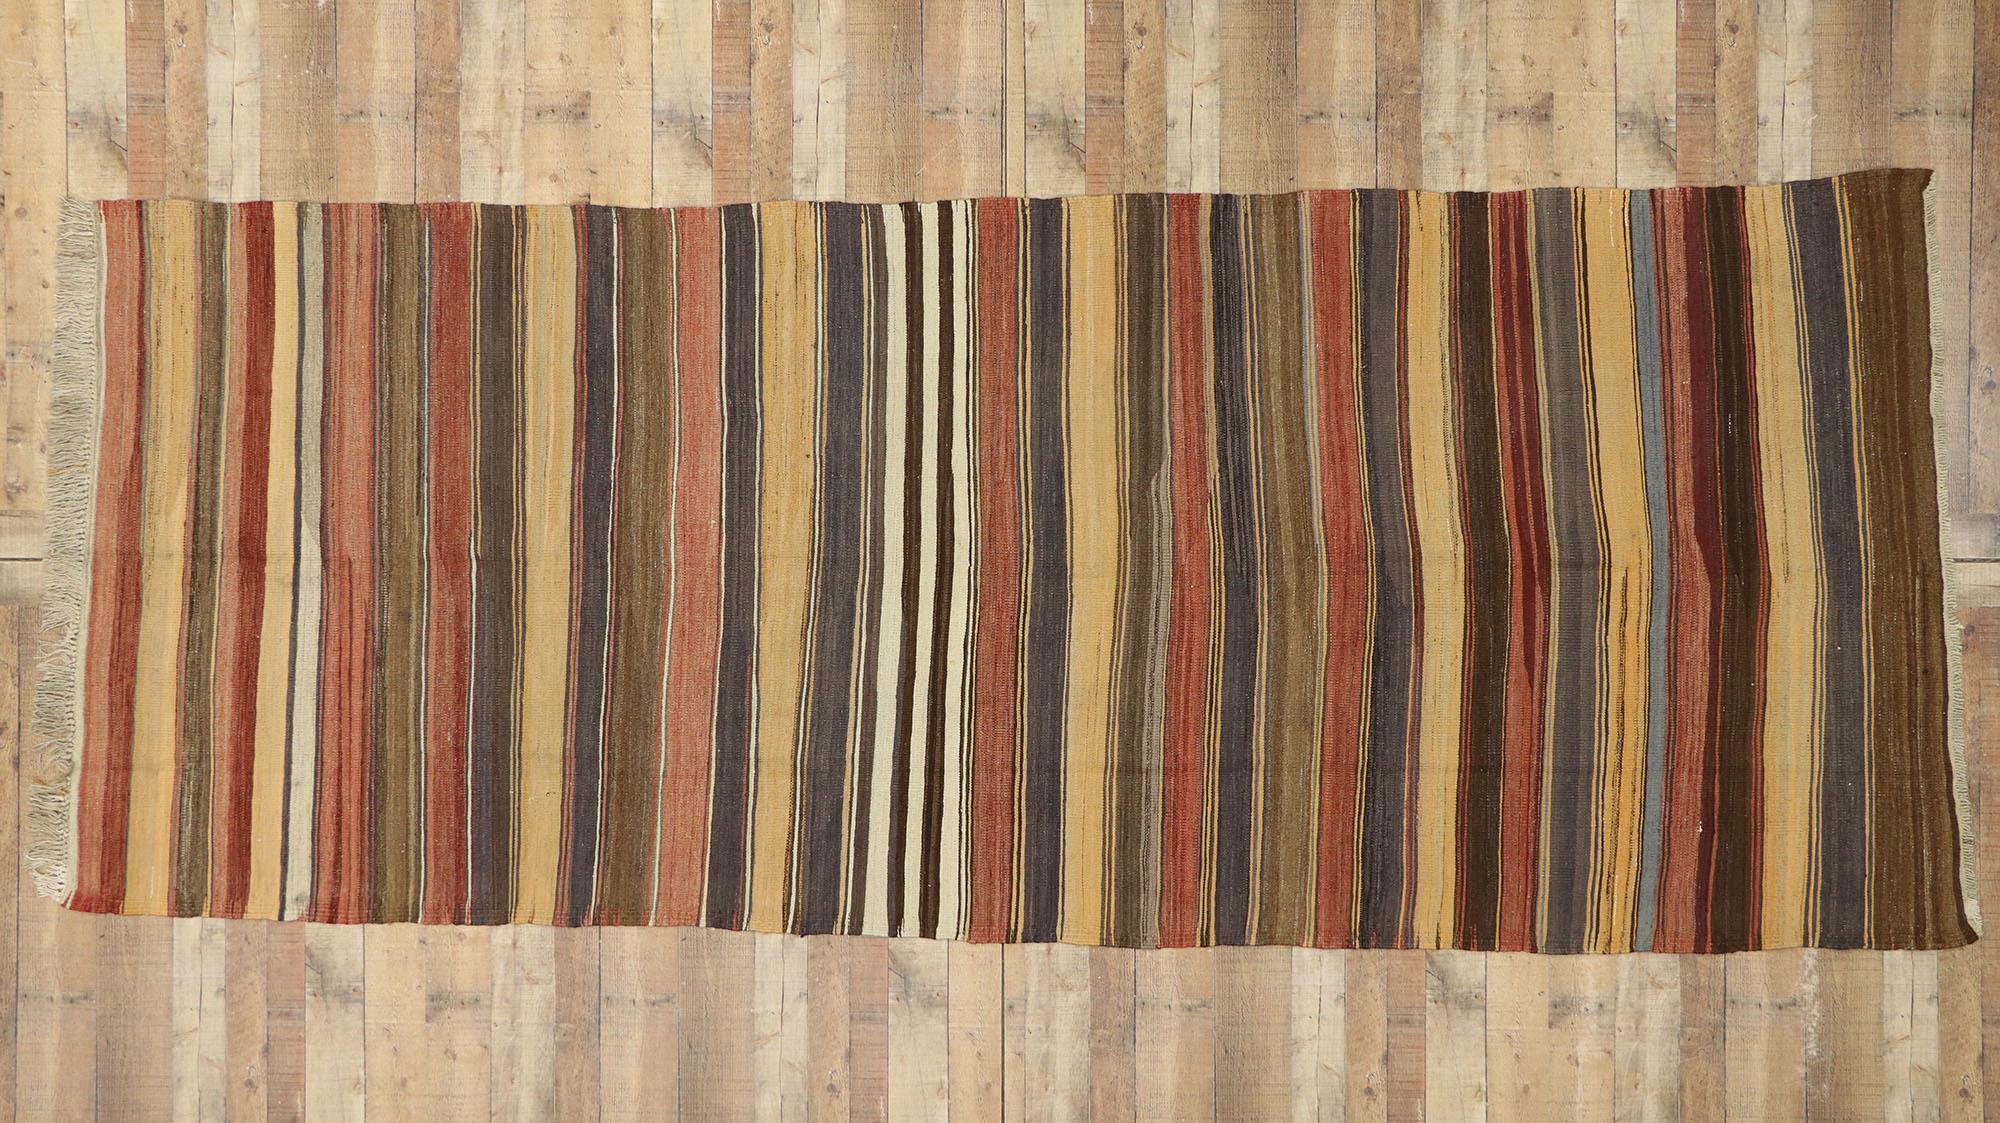 Vintage Turkish Striped Kilim Rug with Modern Rustic Cabin Style 2